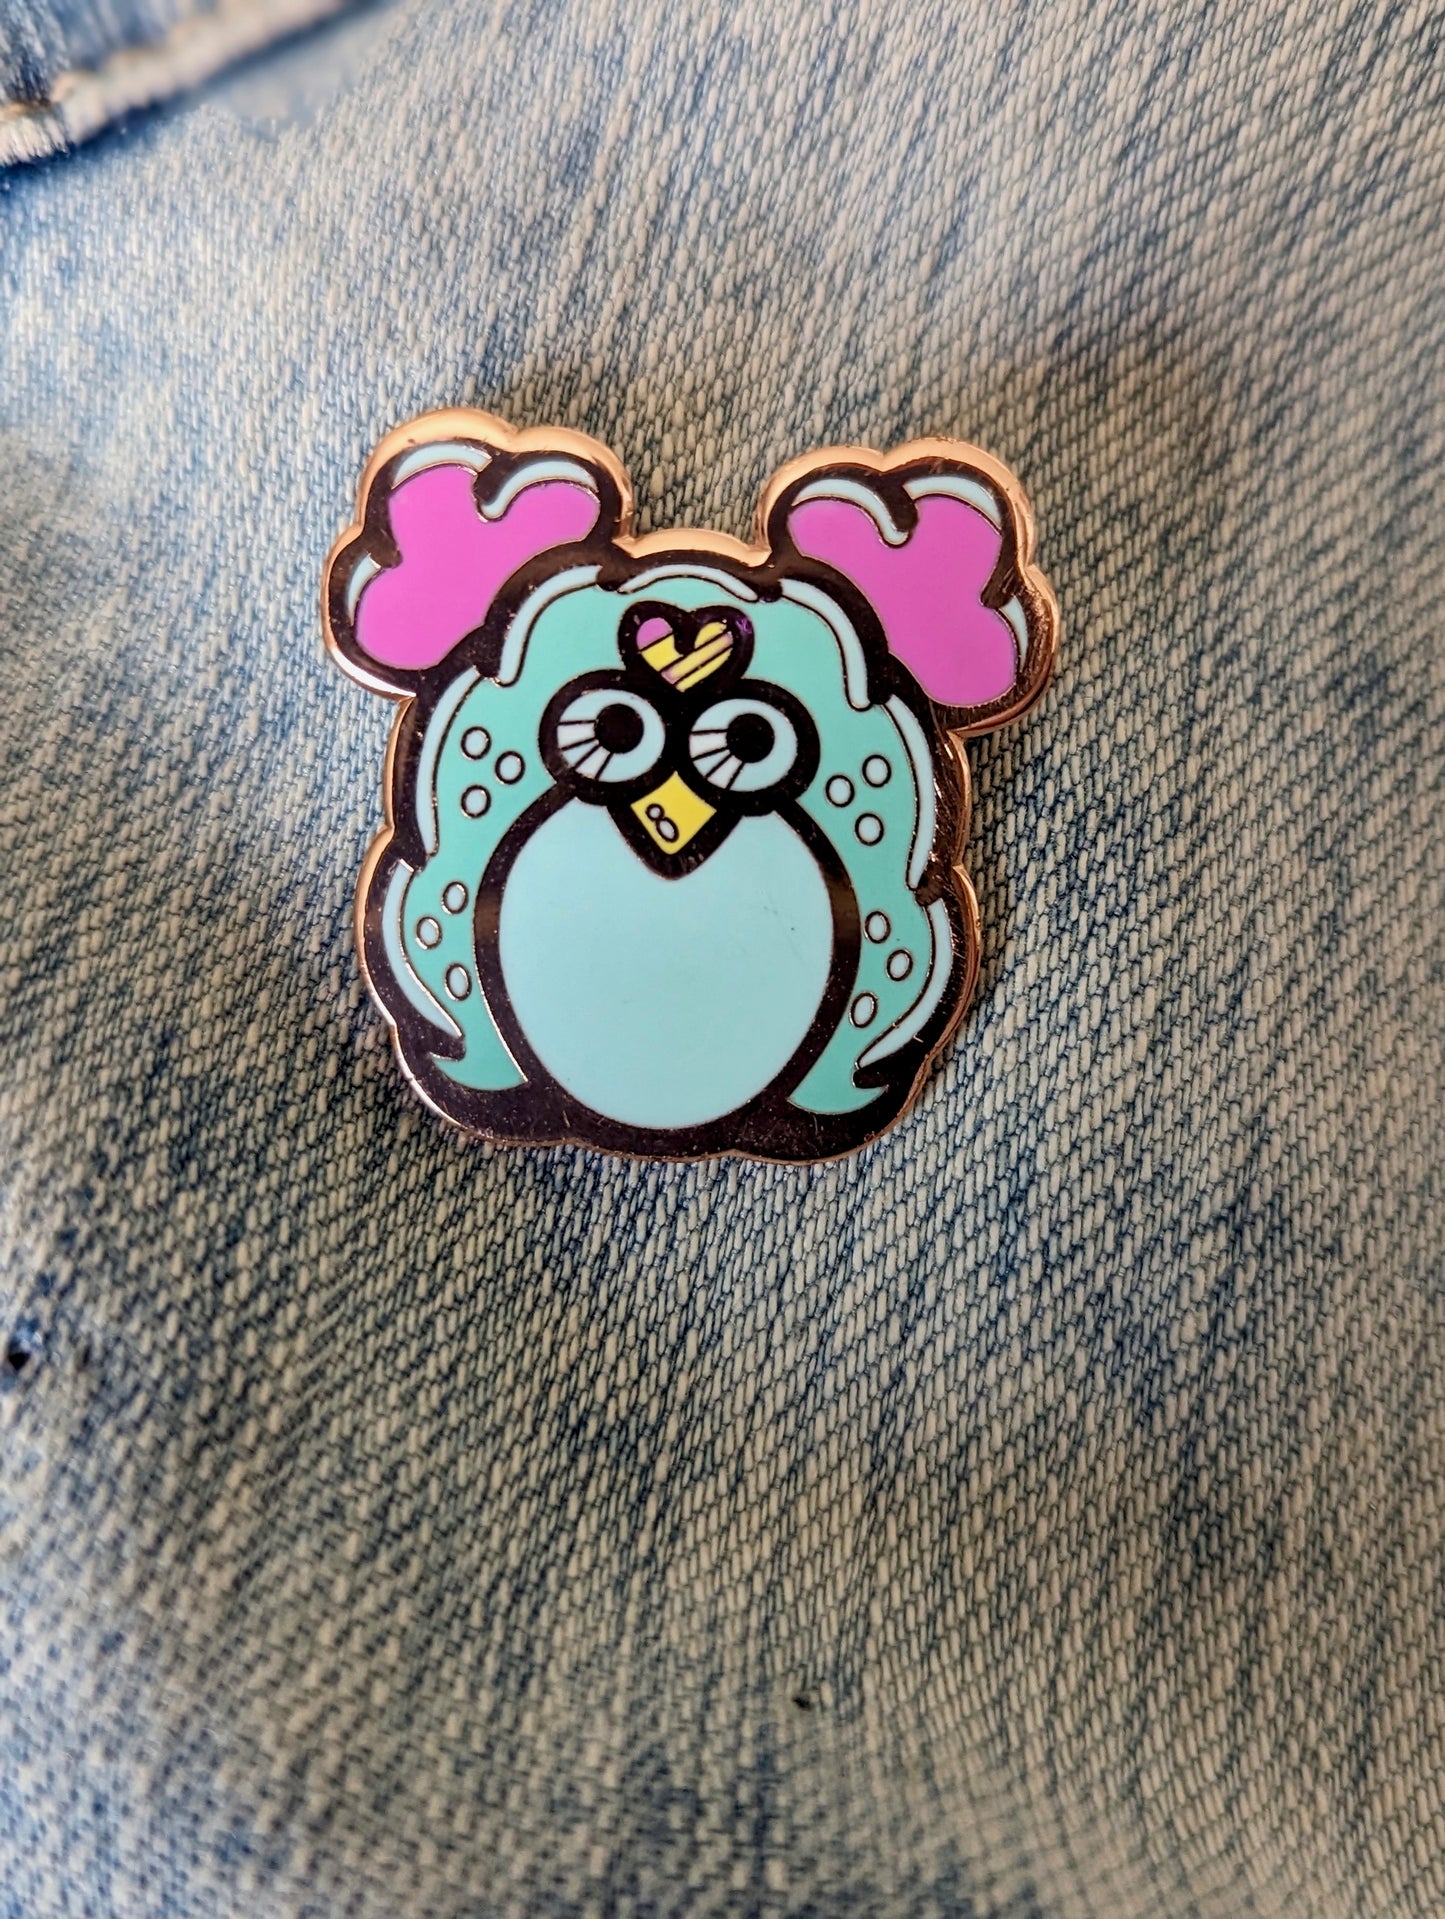 A hard enamel pin in rose gold. The pin measures 1.5”.  It is of a 90’s inspired collectable plush toy in light pink and turquoise.